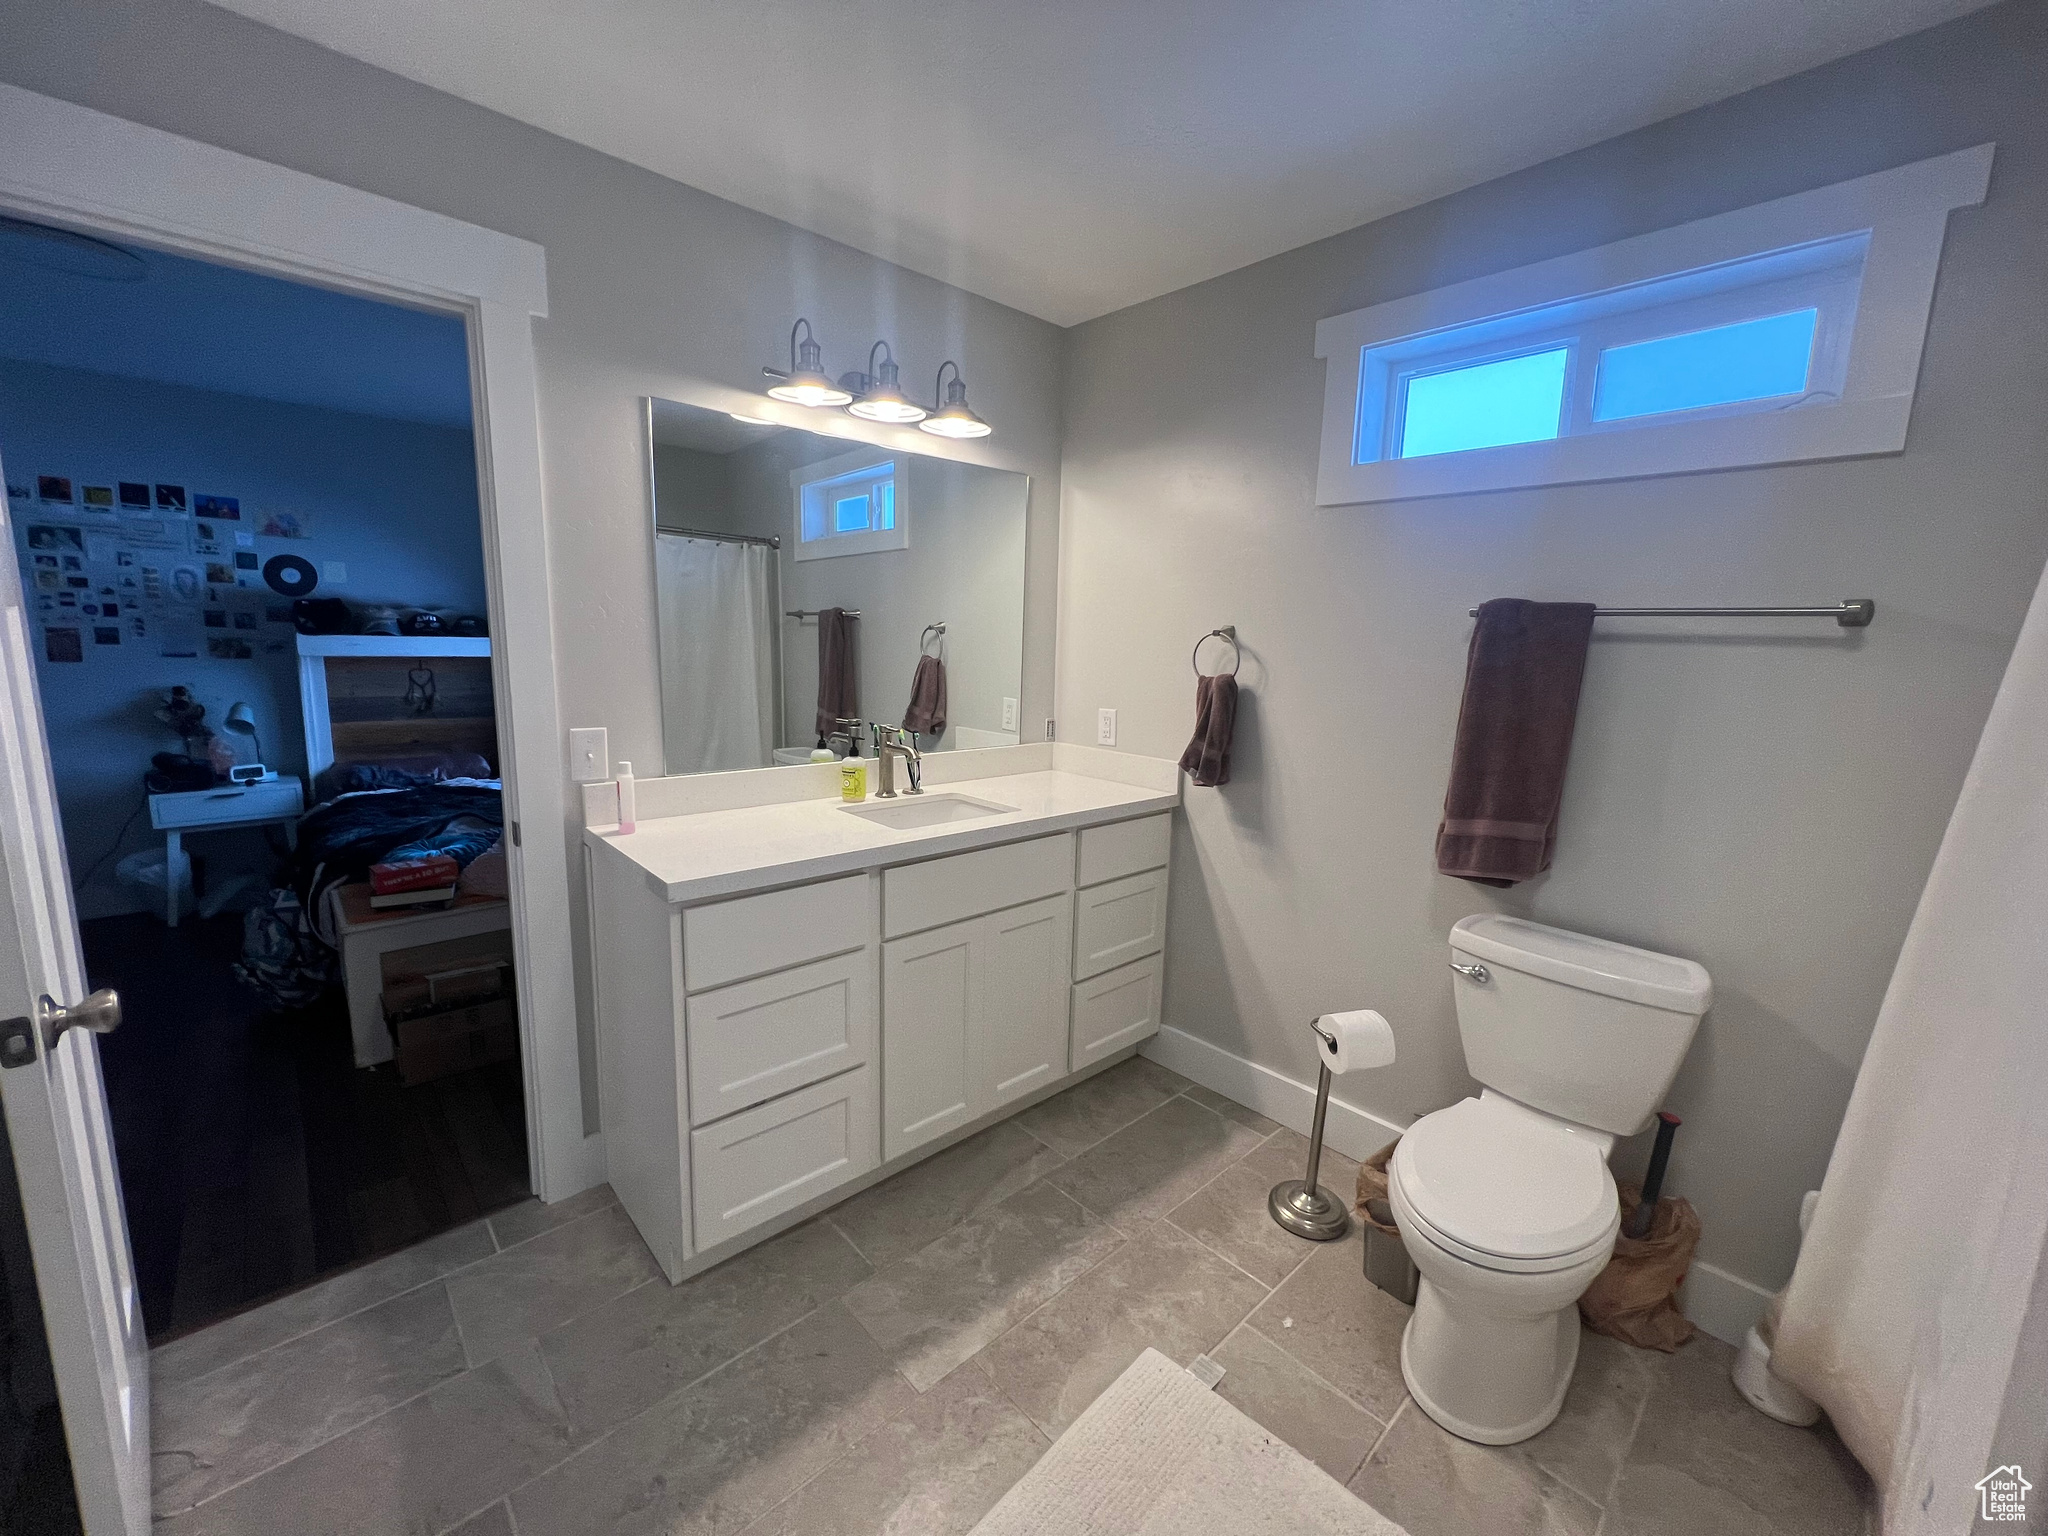 Bathroom with vanity with extensive cabinet space, tile floors, and toilet